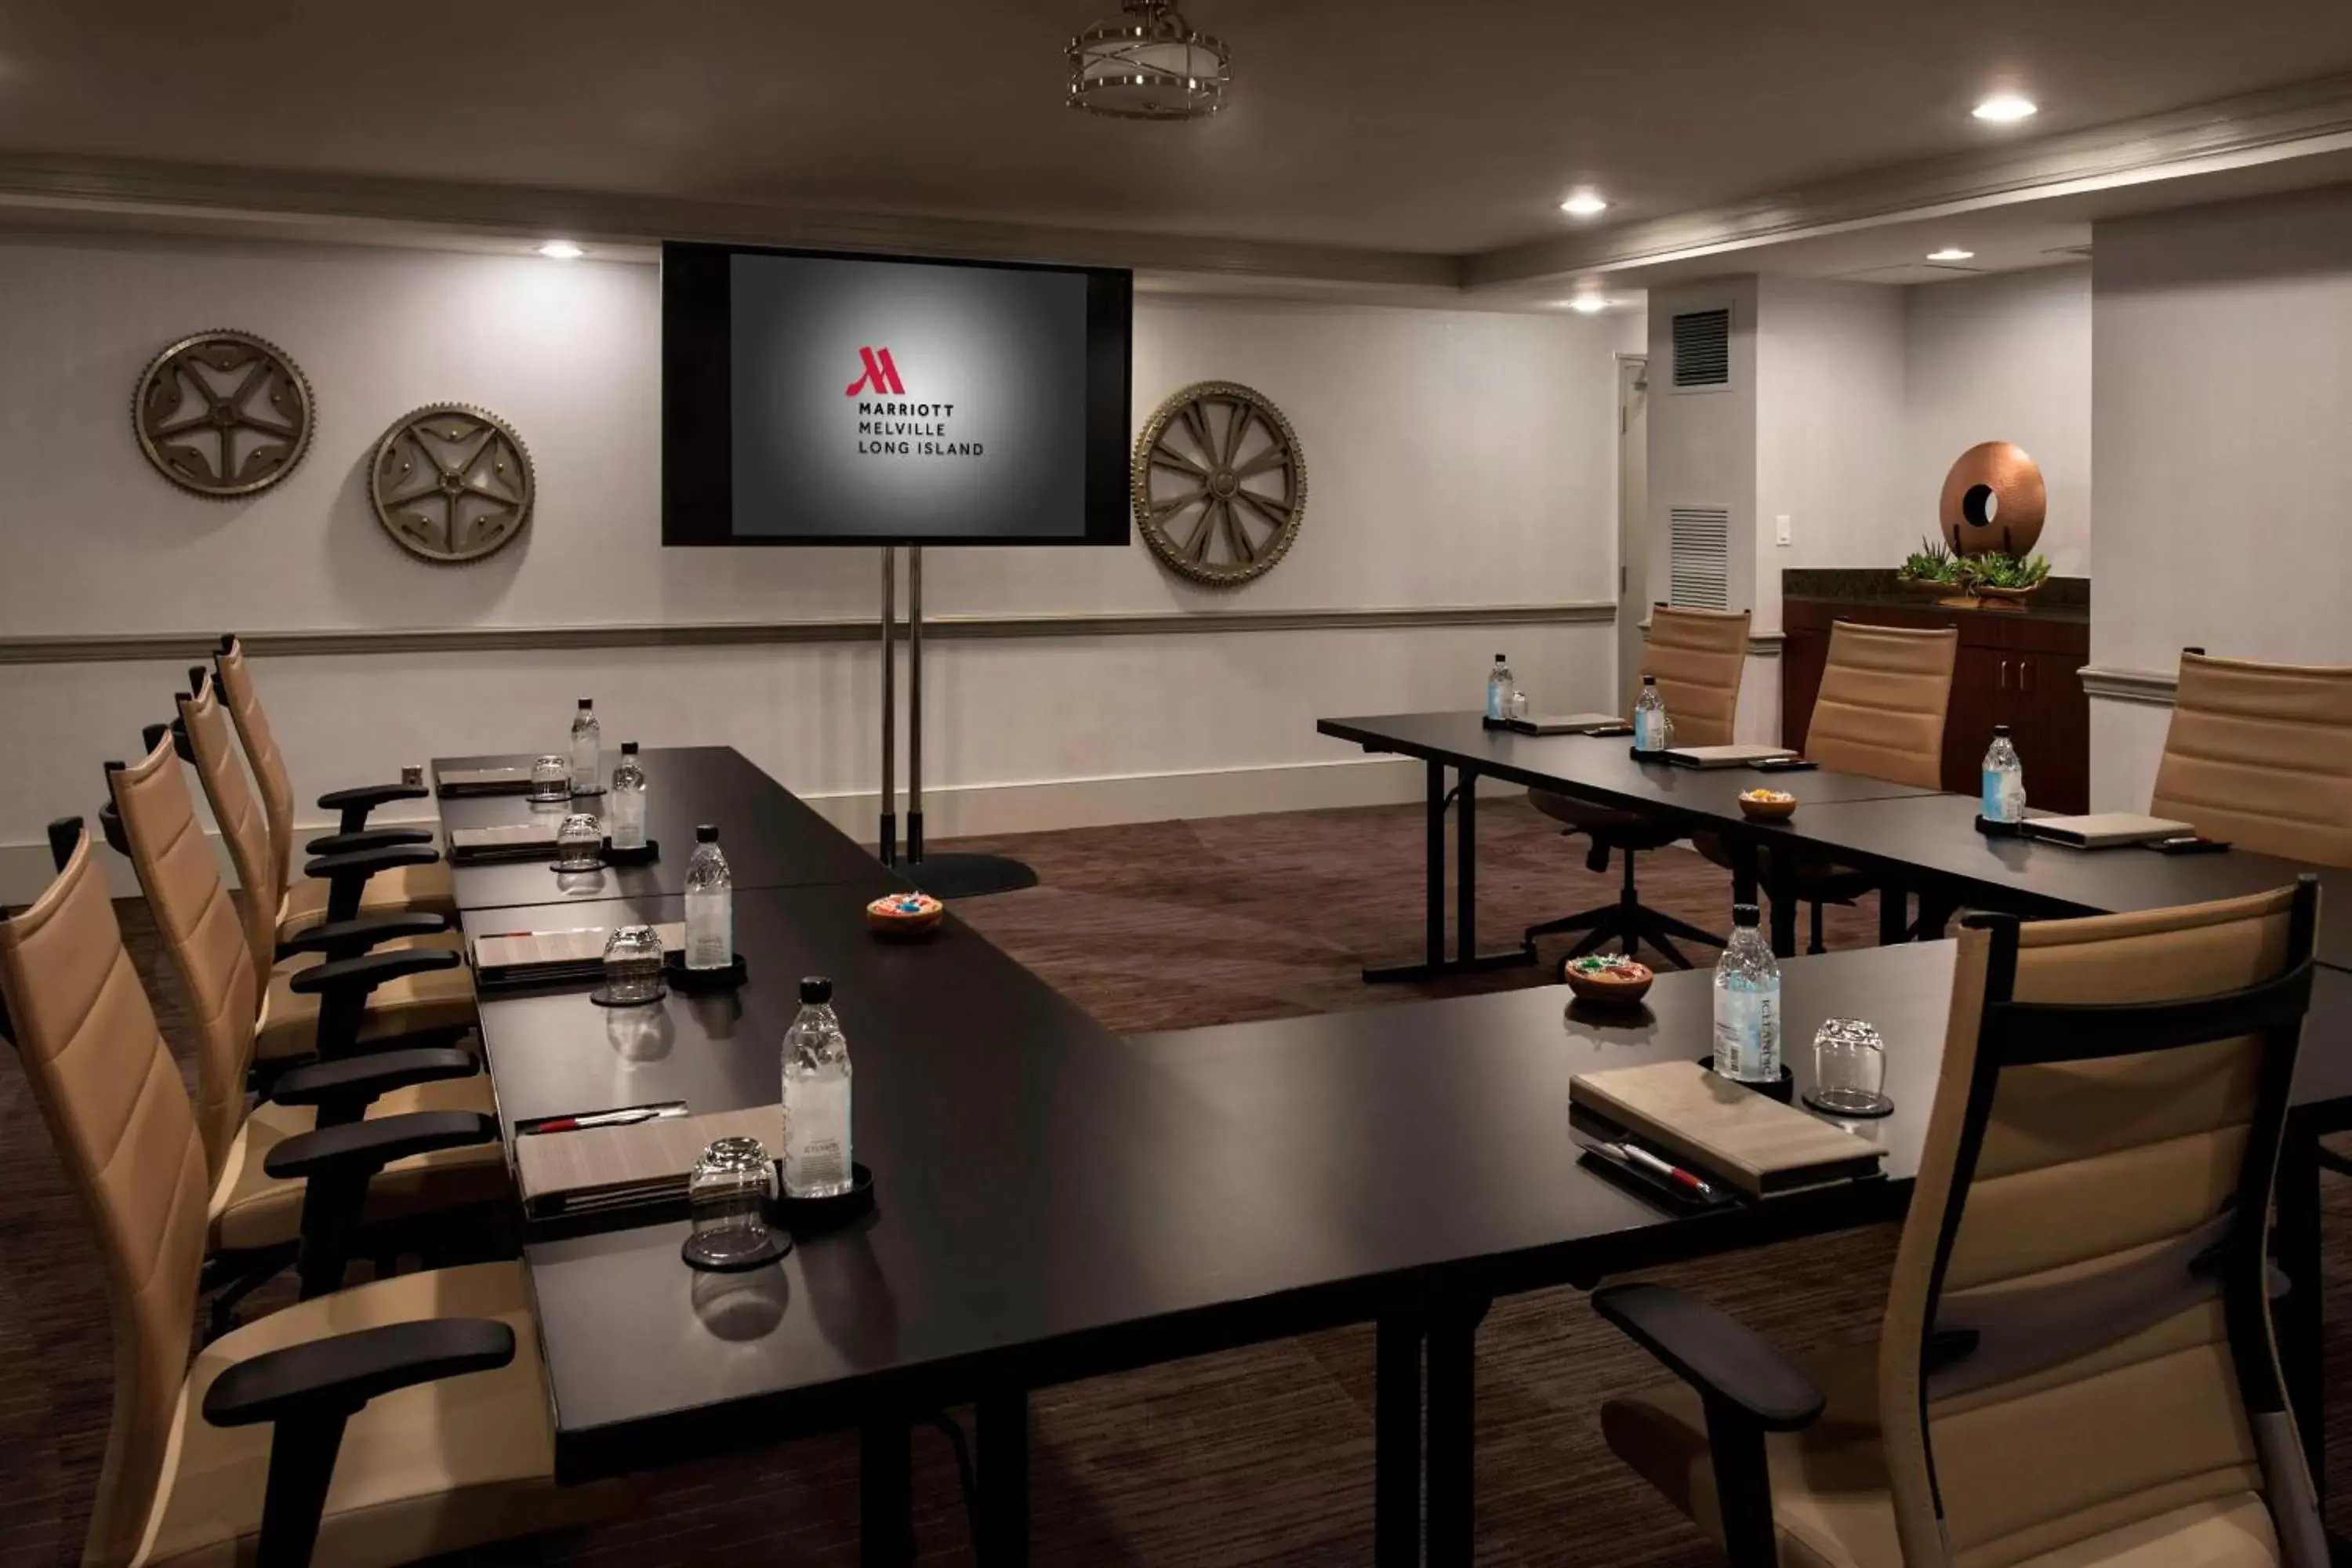 Meeting/conference room in Marriott Melville Long Island